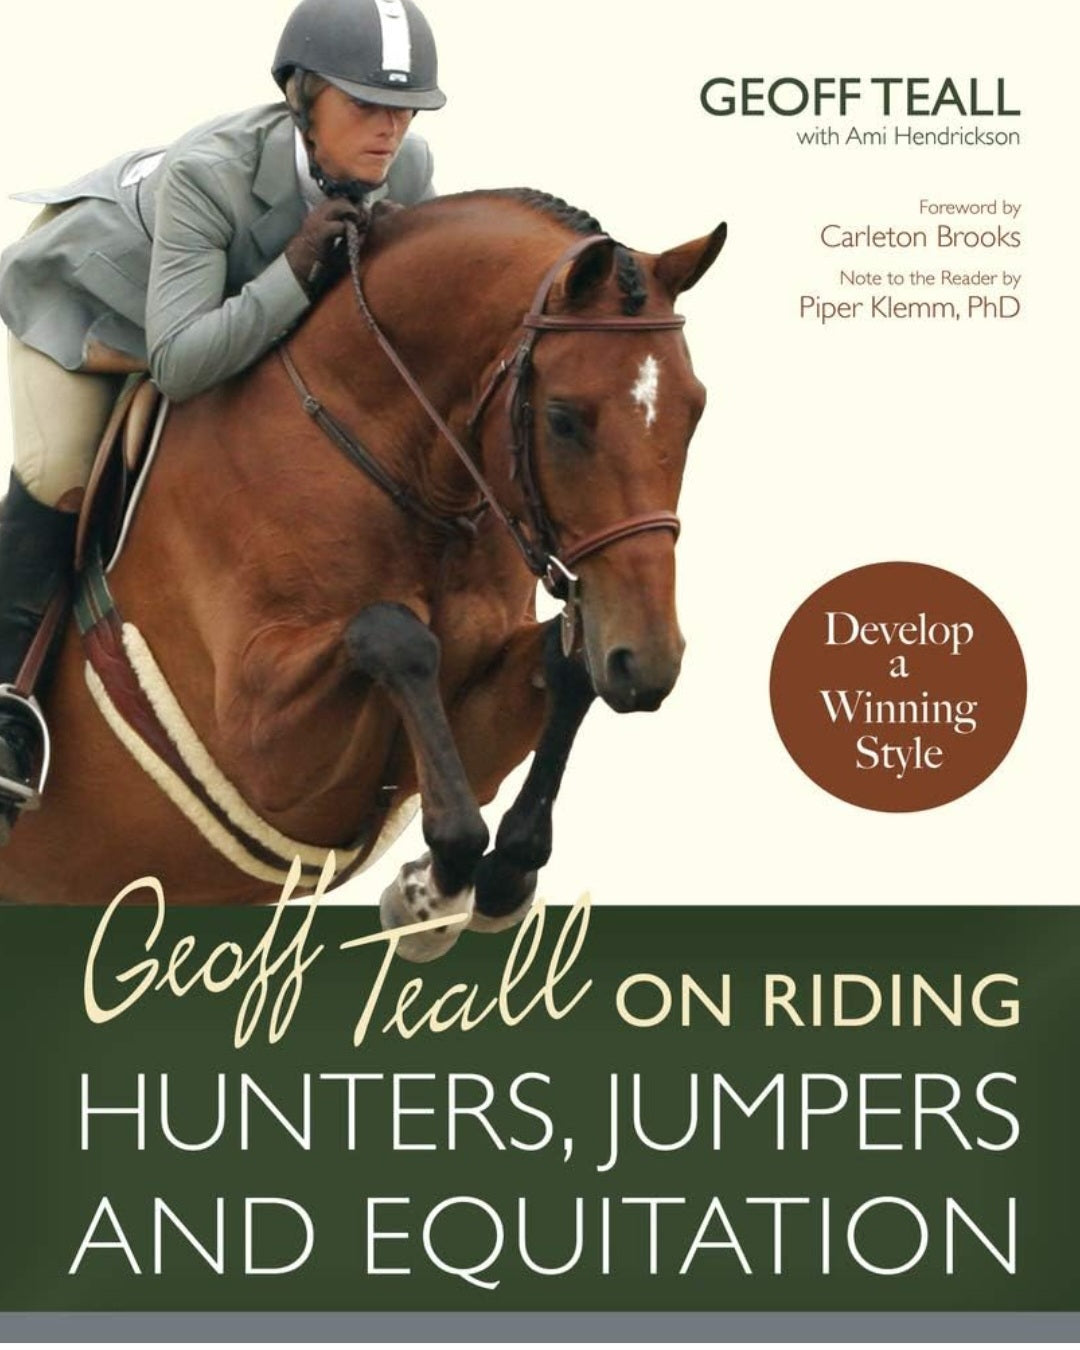 Geoff Teall on Riding Hunter, Jumpers, and Equitation